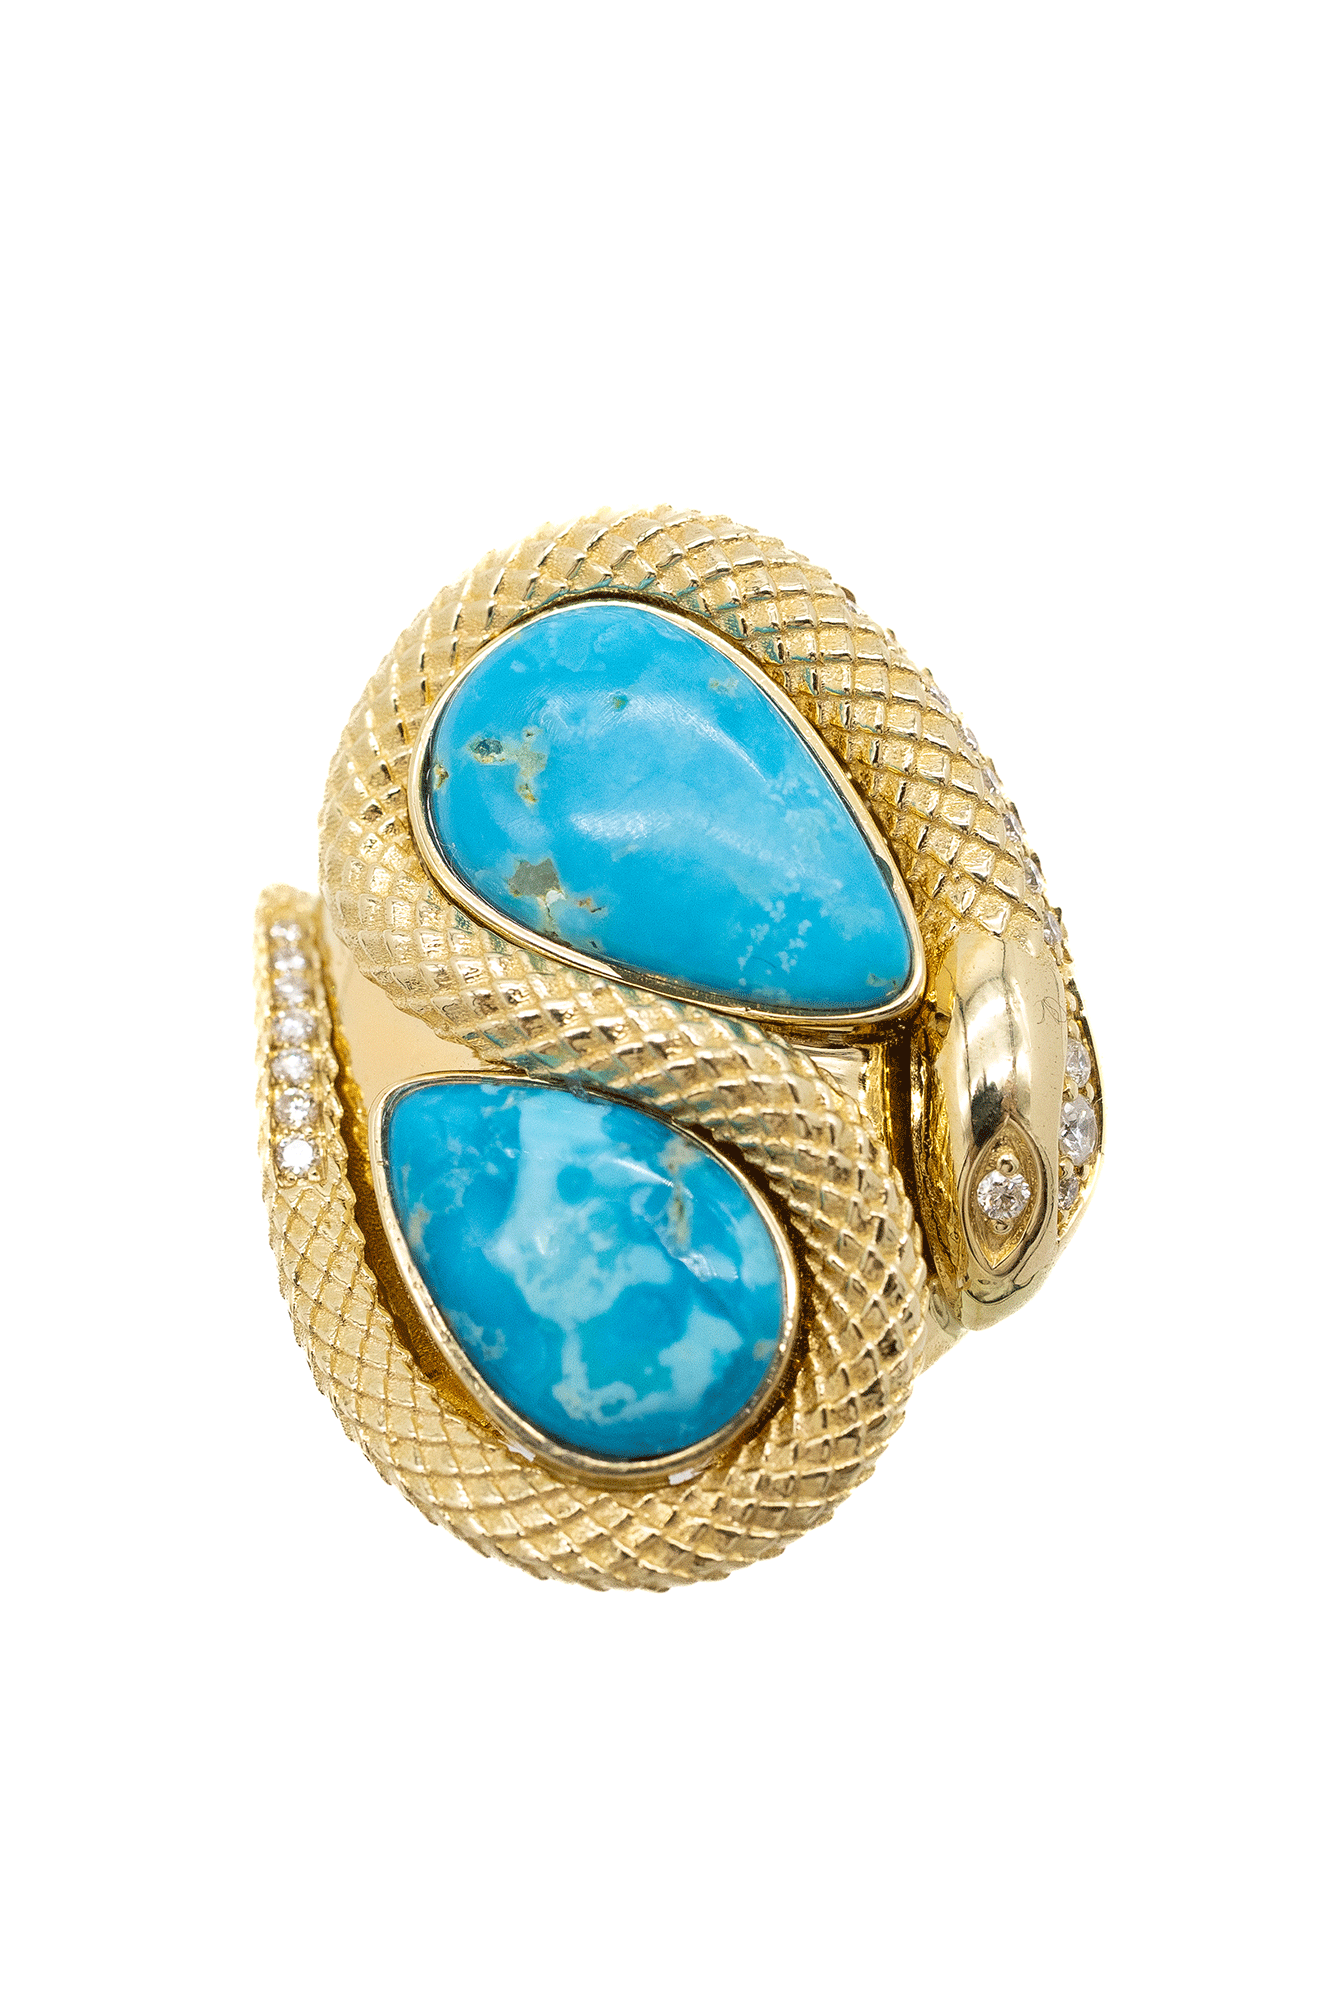 This exquisite Teardrop Turquoise Pave Diamond Snake Ring from the renowned Jacquie Aiche is crafted with a unique teardrop shape and features a pave diamond-encrusted snake design. Boasting superior quality and an undeniable luxury look, this ring is the perfect addition to any jewelry collection.